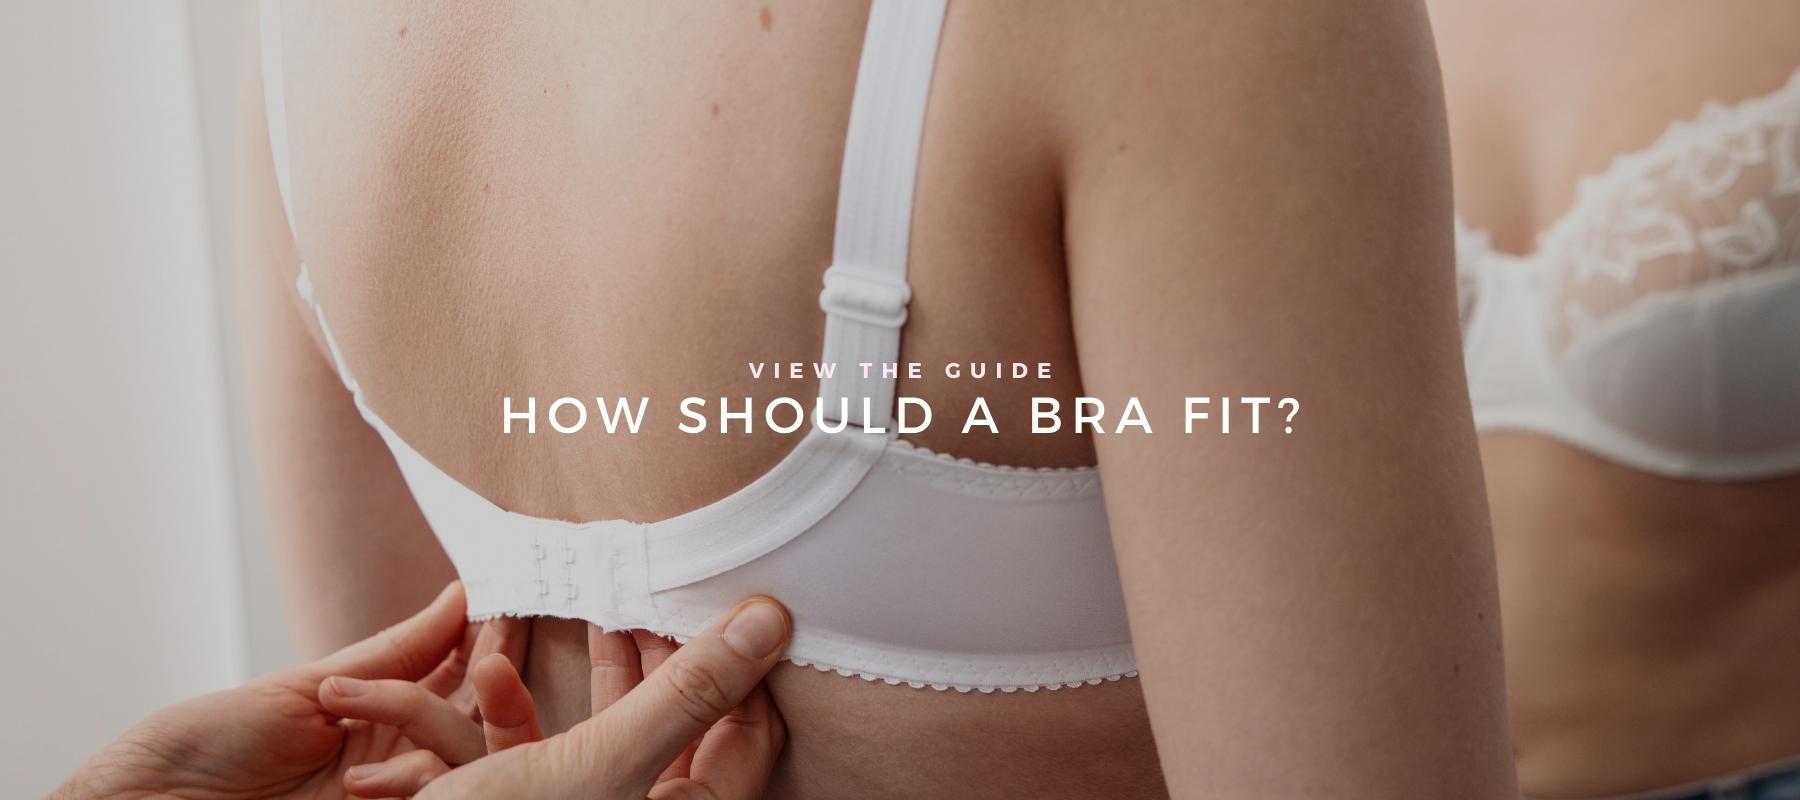 Bra Fitting Guide: How To Find Your True Bra Size And Choose The